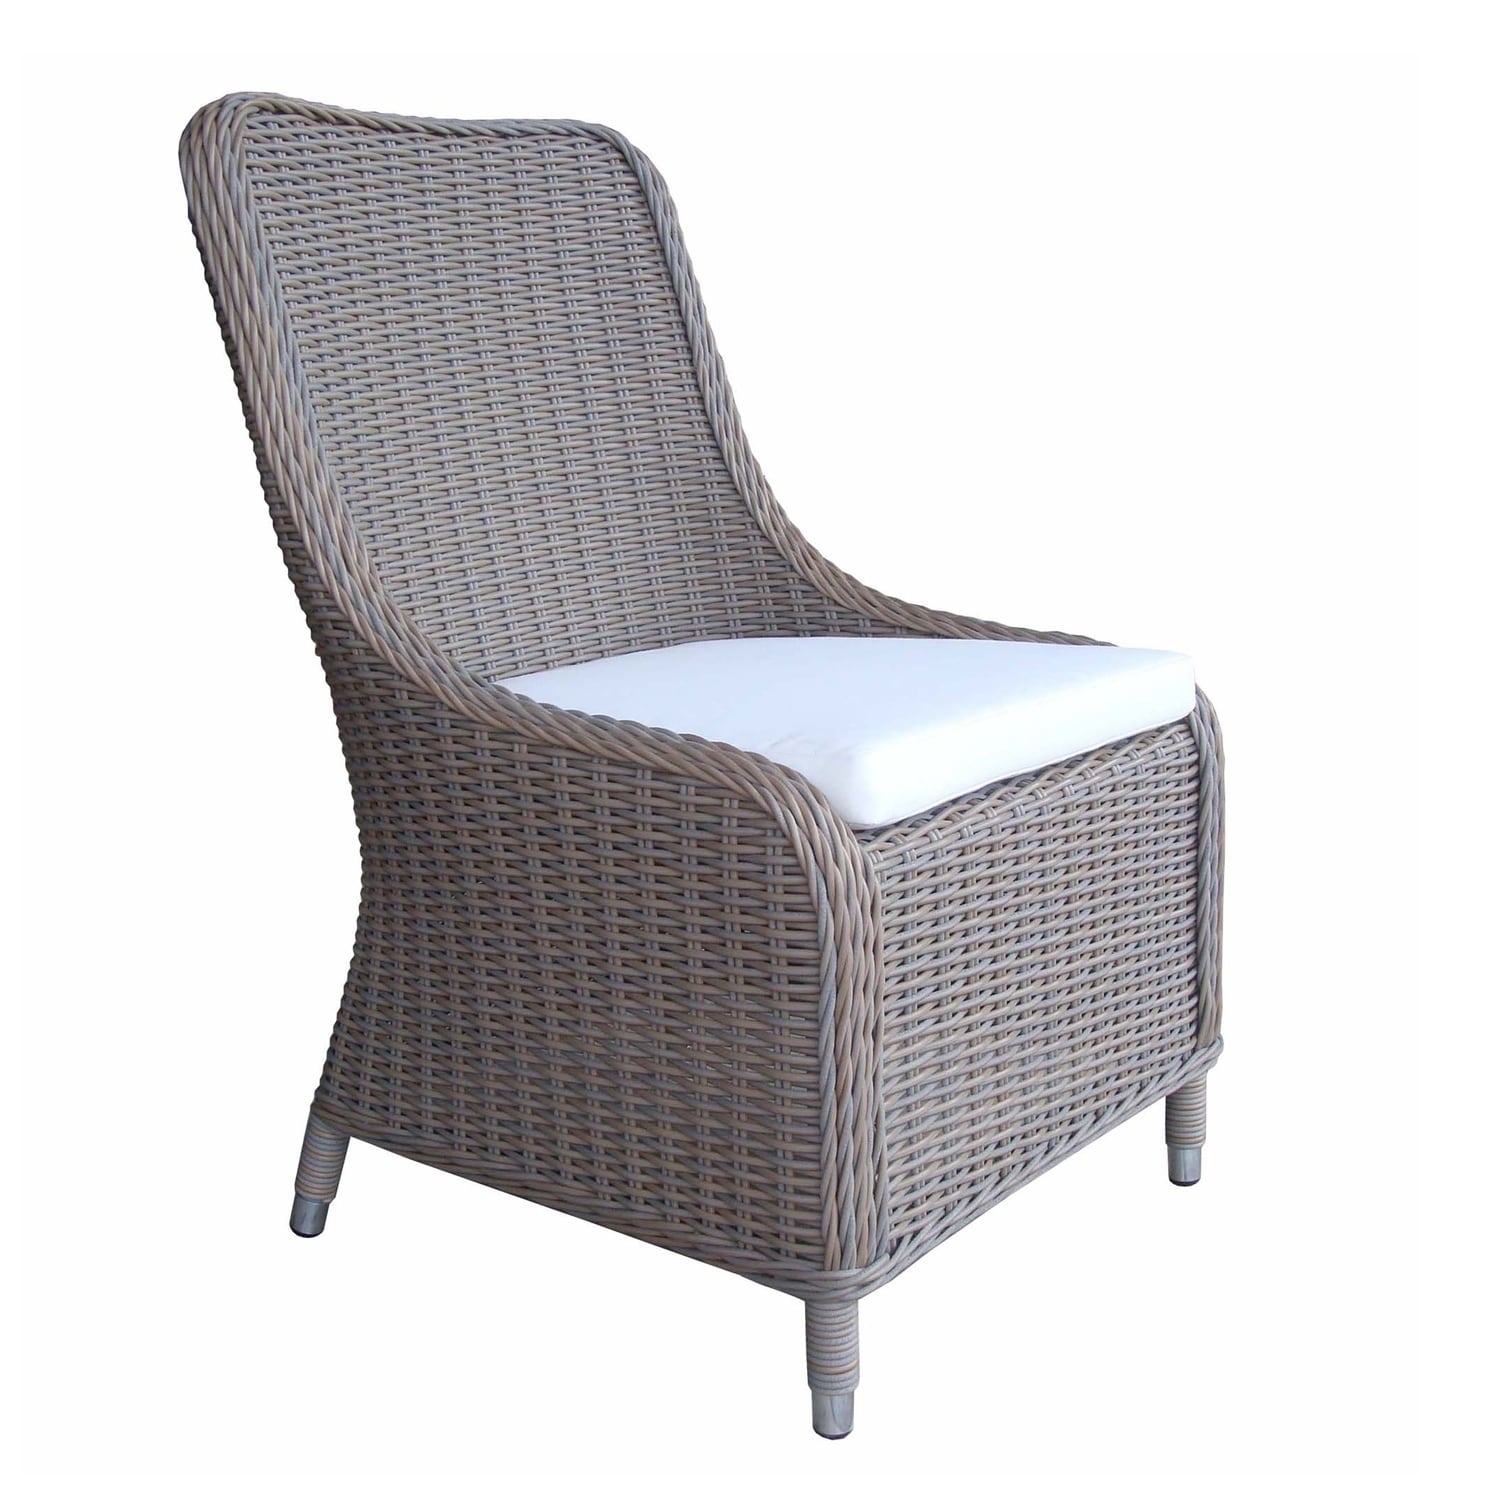 Padmas Plantation Nautilus Collection All Weather Wicker Outdoor Dining Chair 0e60237b Ccaf 4c67 9409 1bfe999e4351 